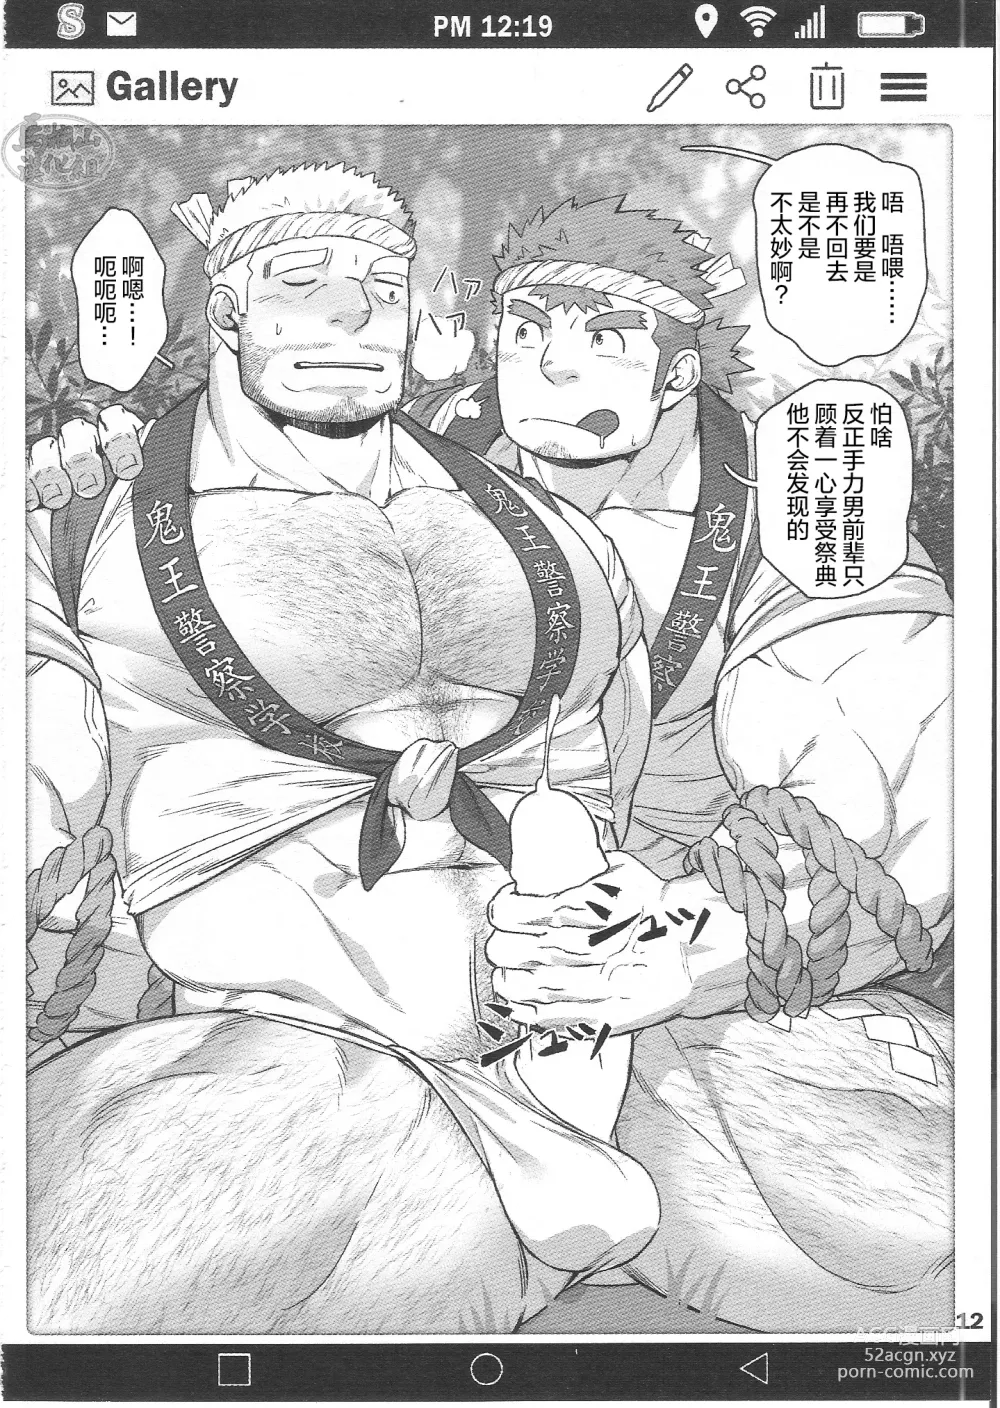 Page 14 of doujinshi SUMMONS GALLERY ｜东京放课后召唤师相册